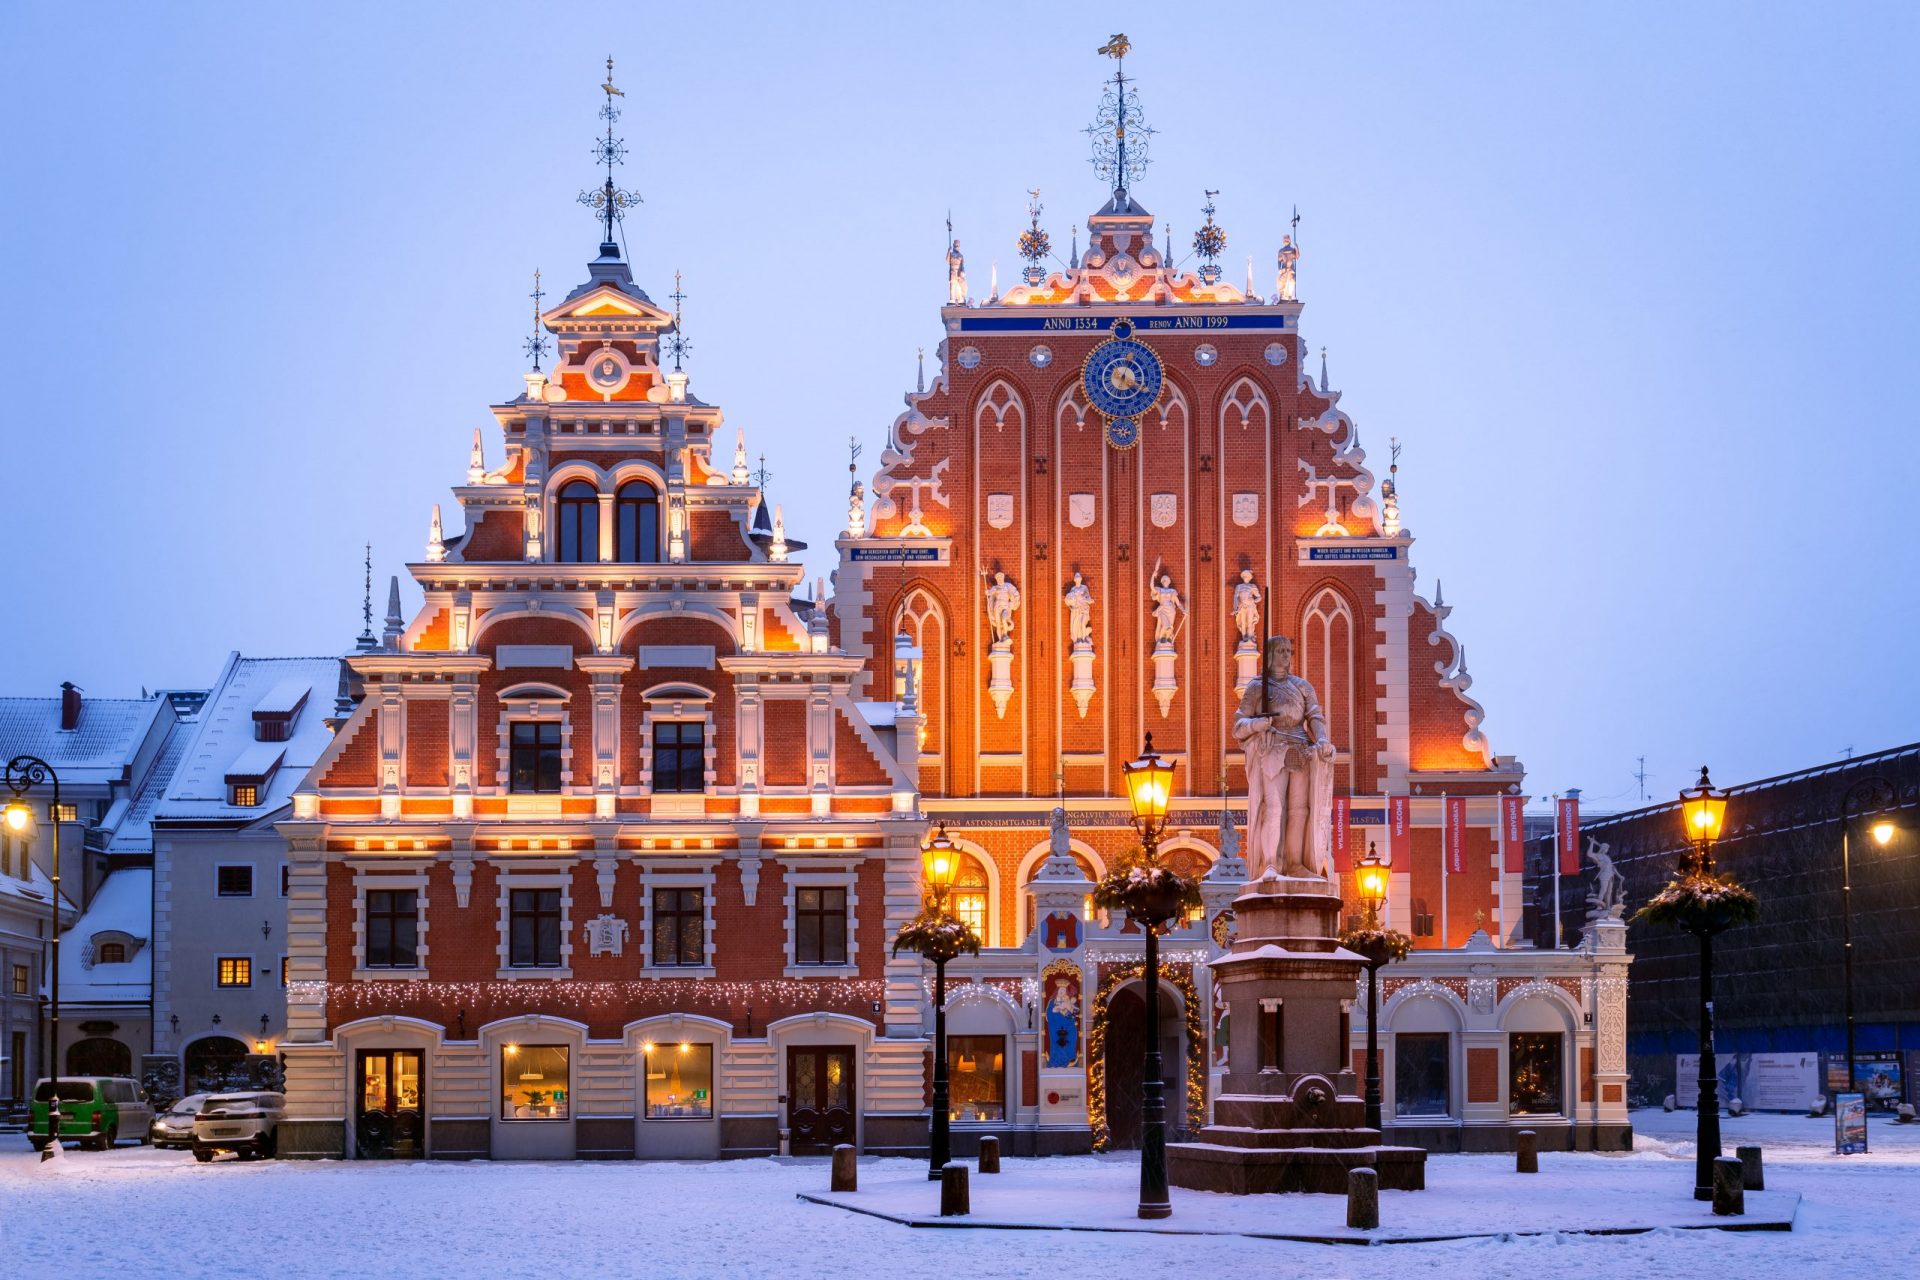 <p>The Vecrīga, the historic center of Riga, overflows with charm thanks to its small cobbled streets, its medieval buildings, and its museums, including the famous House of the Blackheads (photo).</p> <p>The average price of a night in an Airbnb in Riga (according to Time Out) is 55 € ($60).</p>